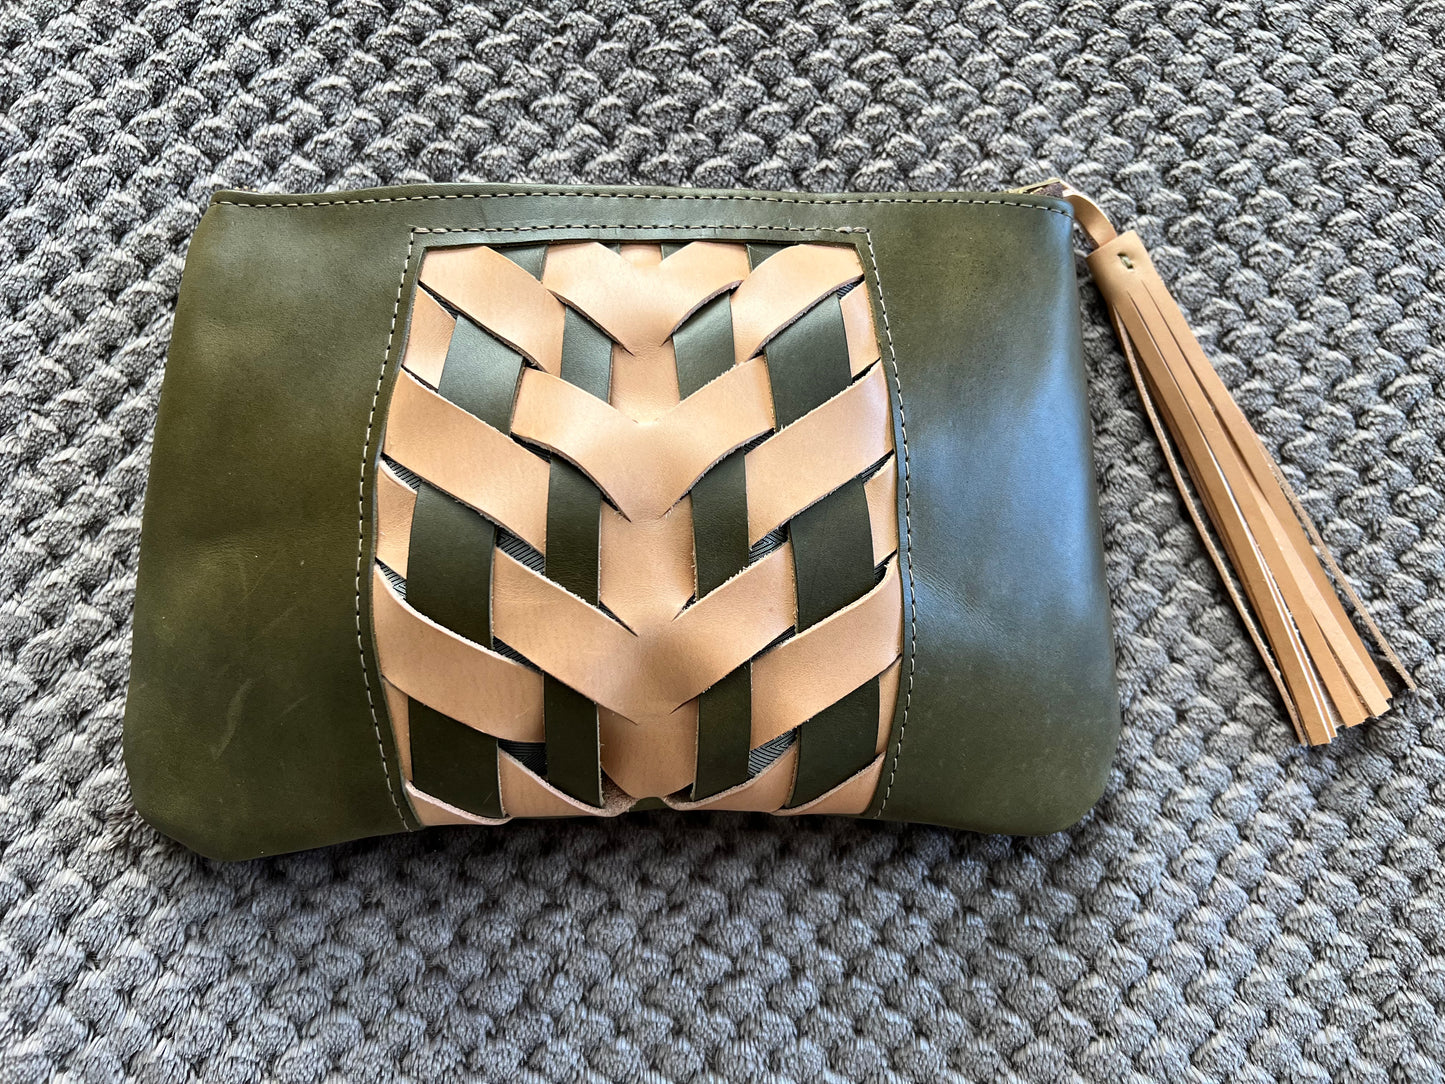 Woven Leather Clutch | Tasseled Green Leather Clutch | Oiled Leather Clutch